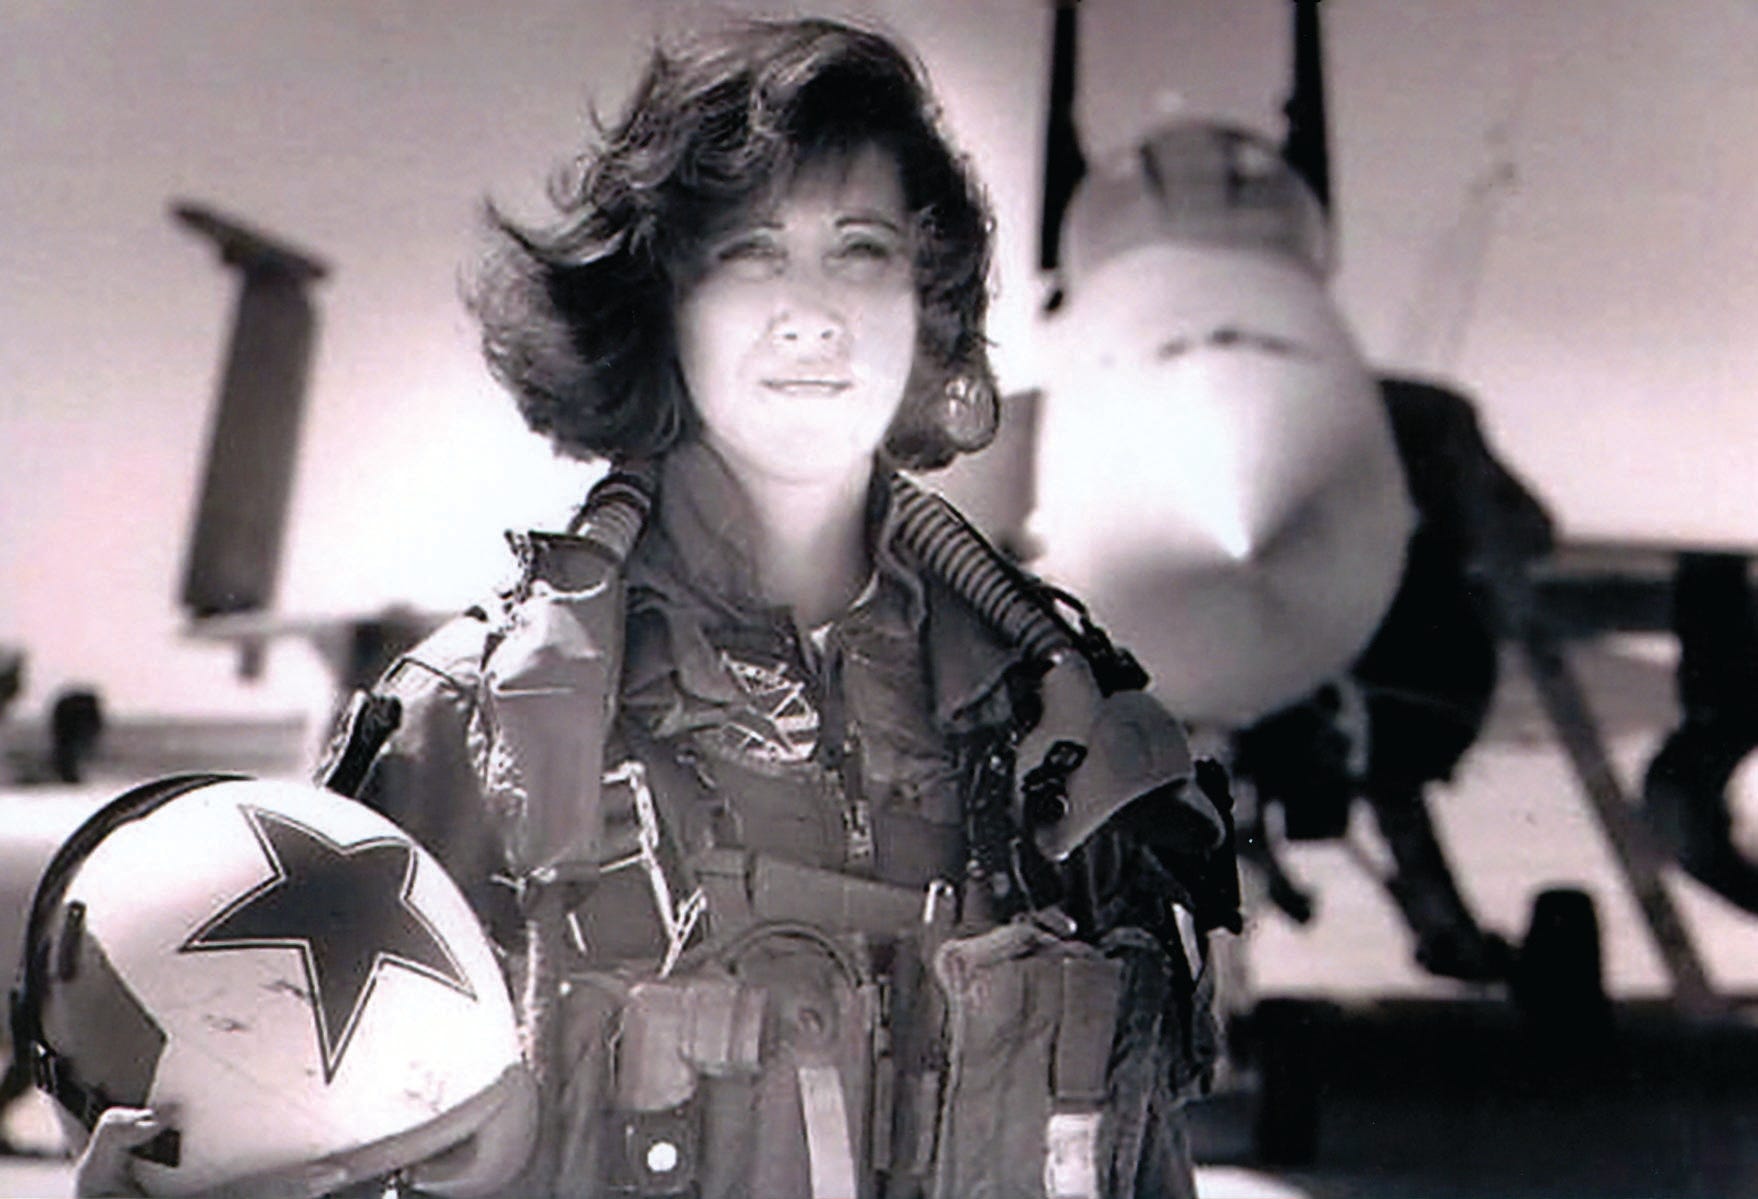 Southwest emergency landing pilot Tammie Jo Shults is a pioneer with &apos;nerves of steel&apos;